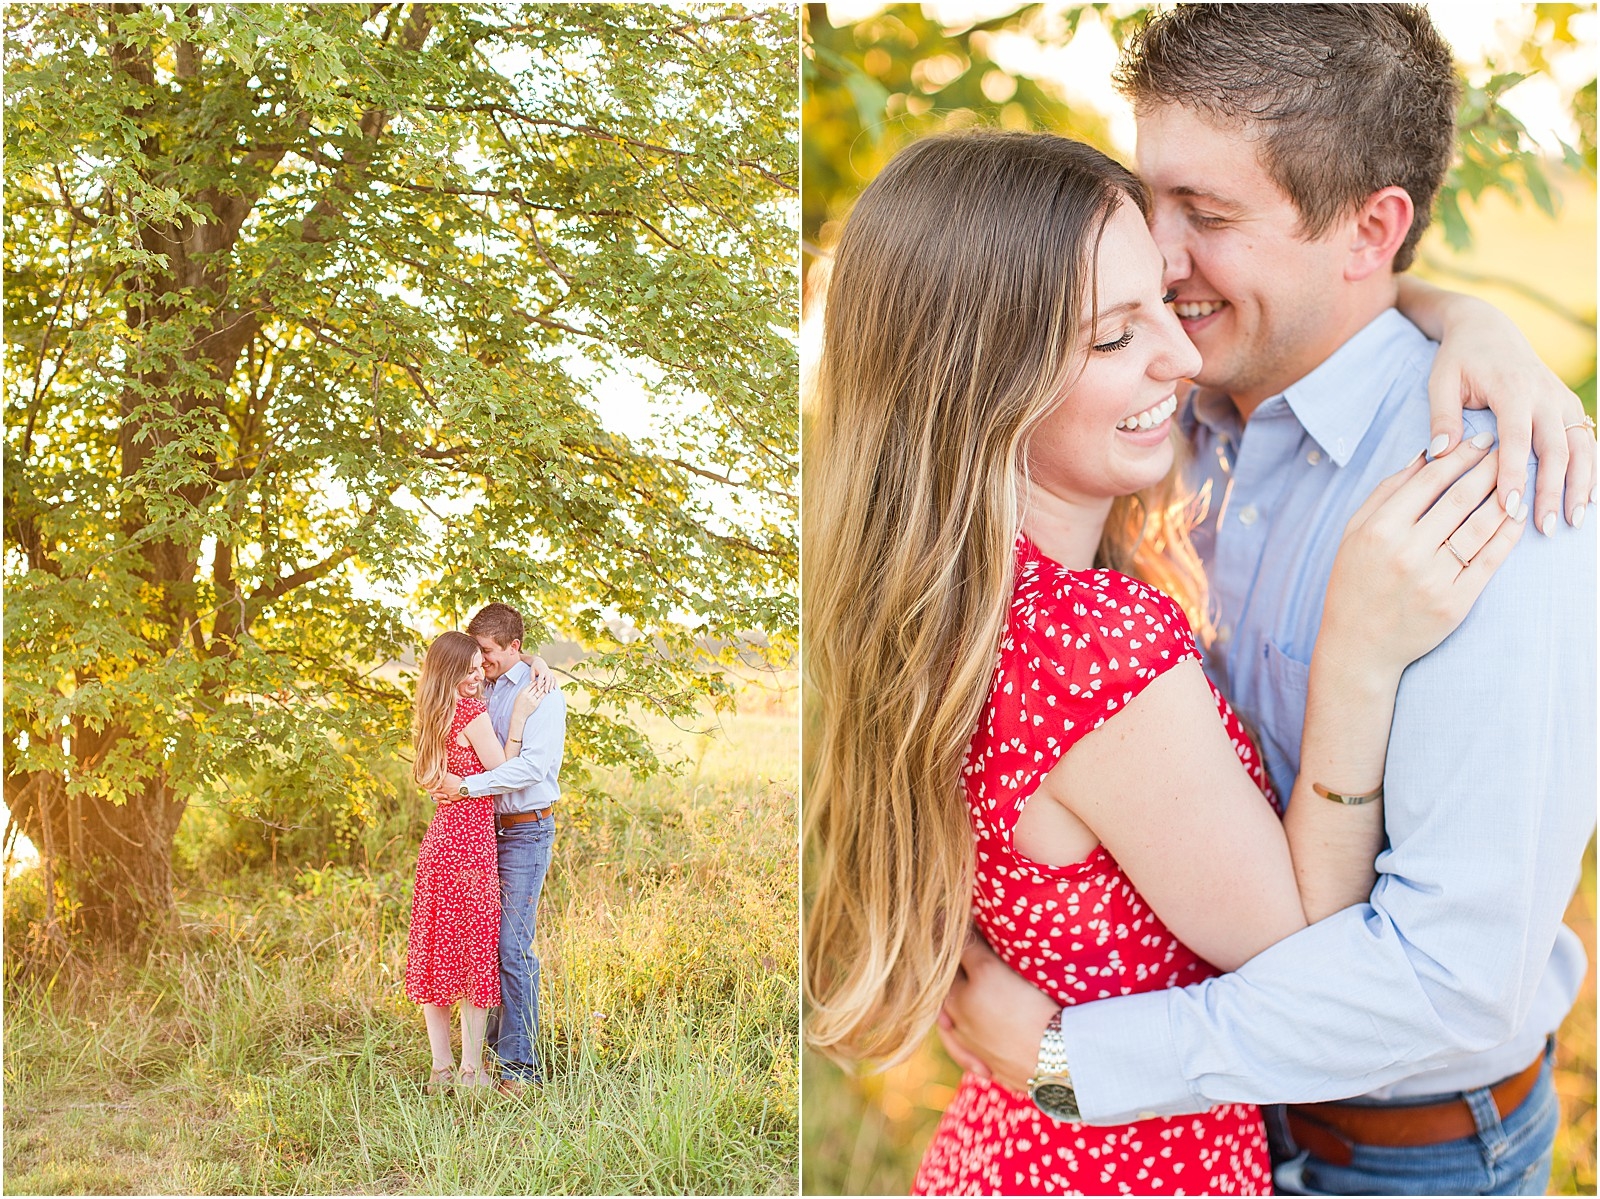 A Jasper Indiana Engagement Session | Tori and Kyle | Bret and Brandie Photography040.jpg